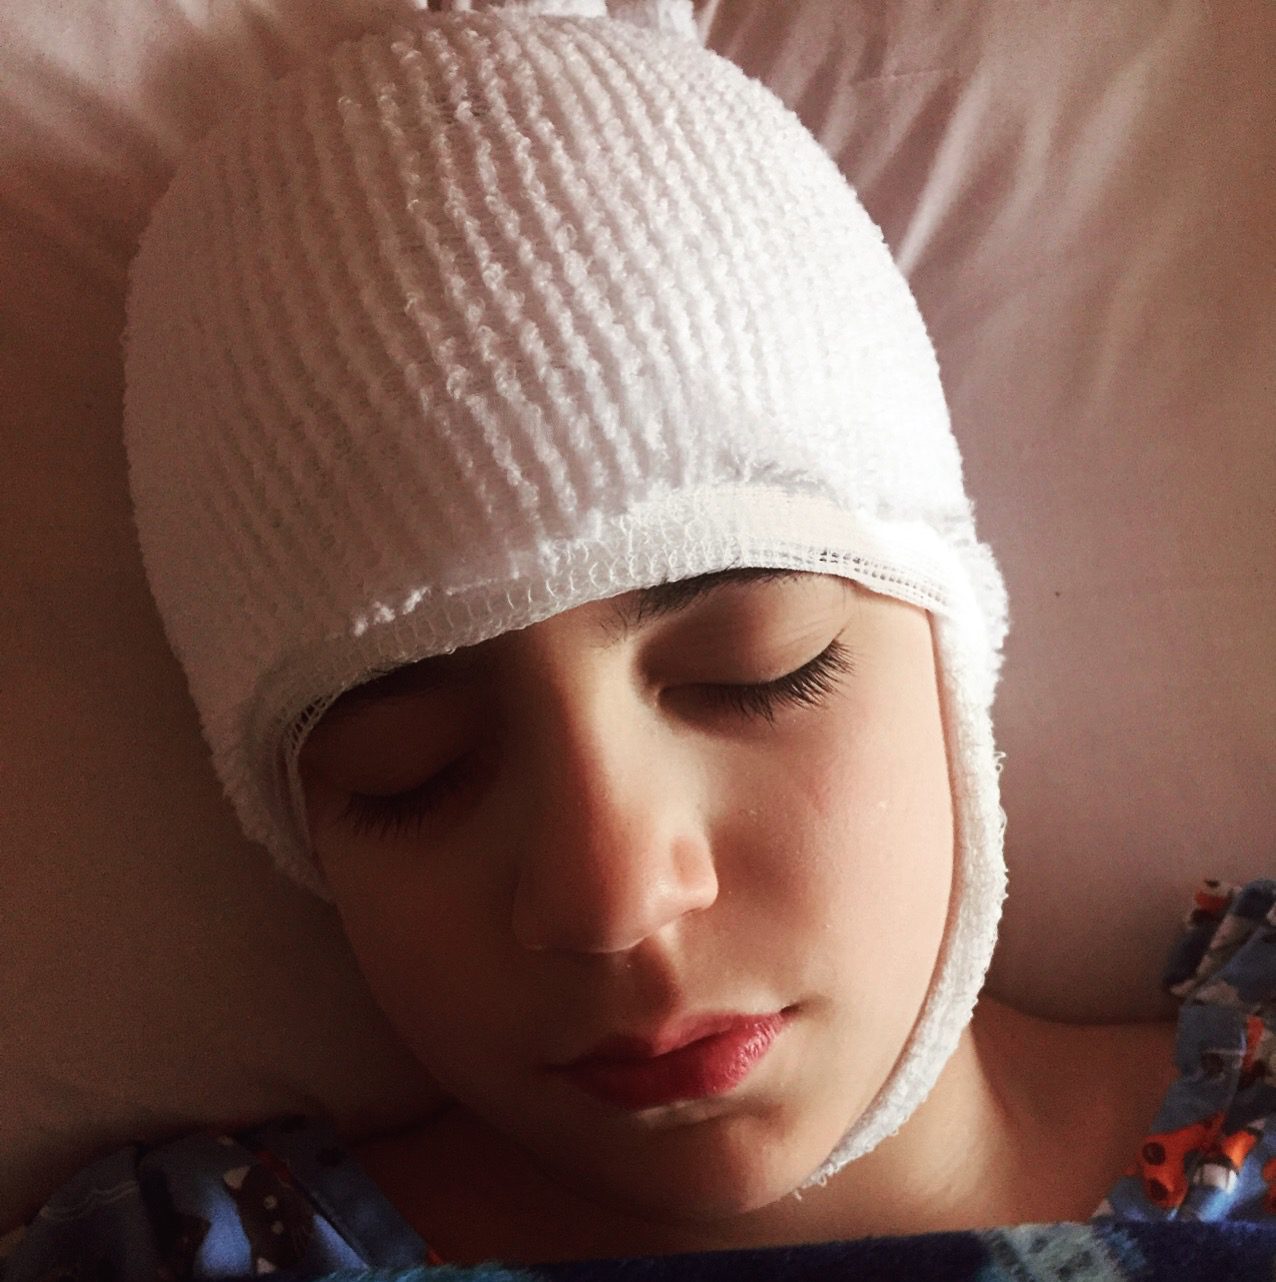 Logan Just out of surgery on March 30, 2017